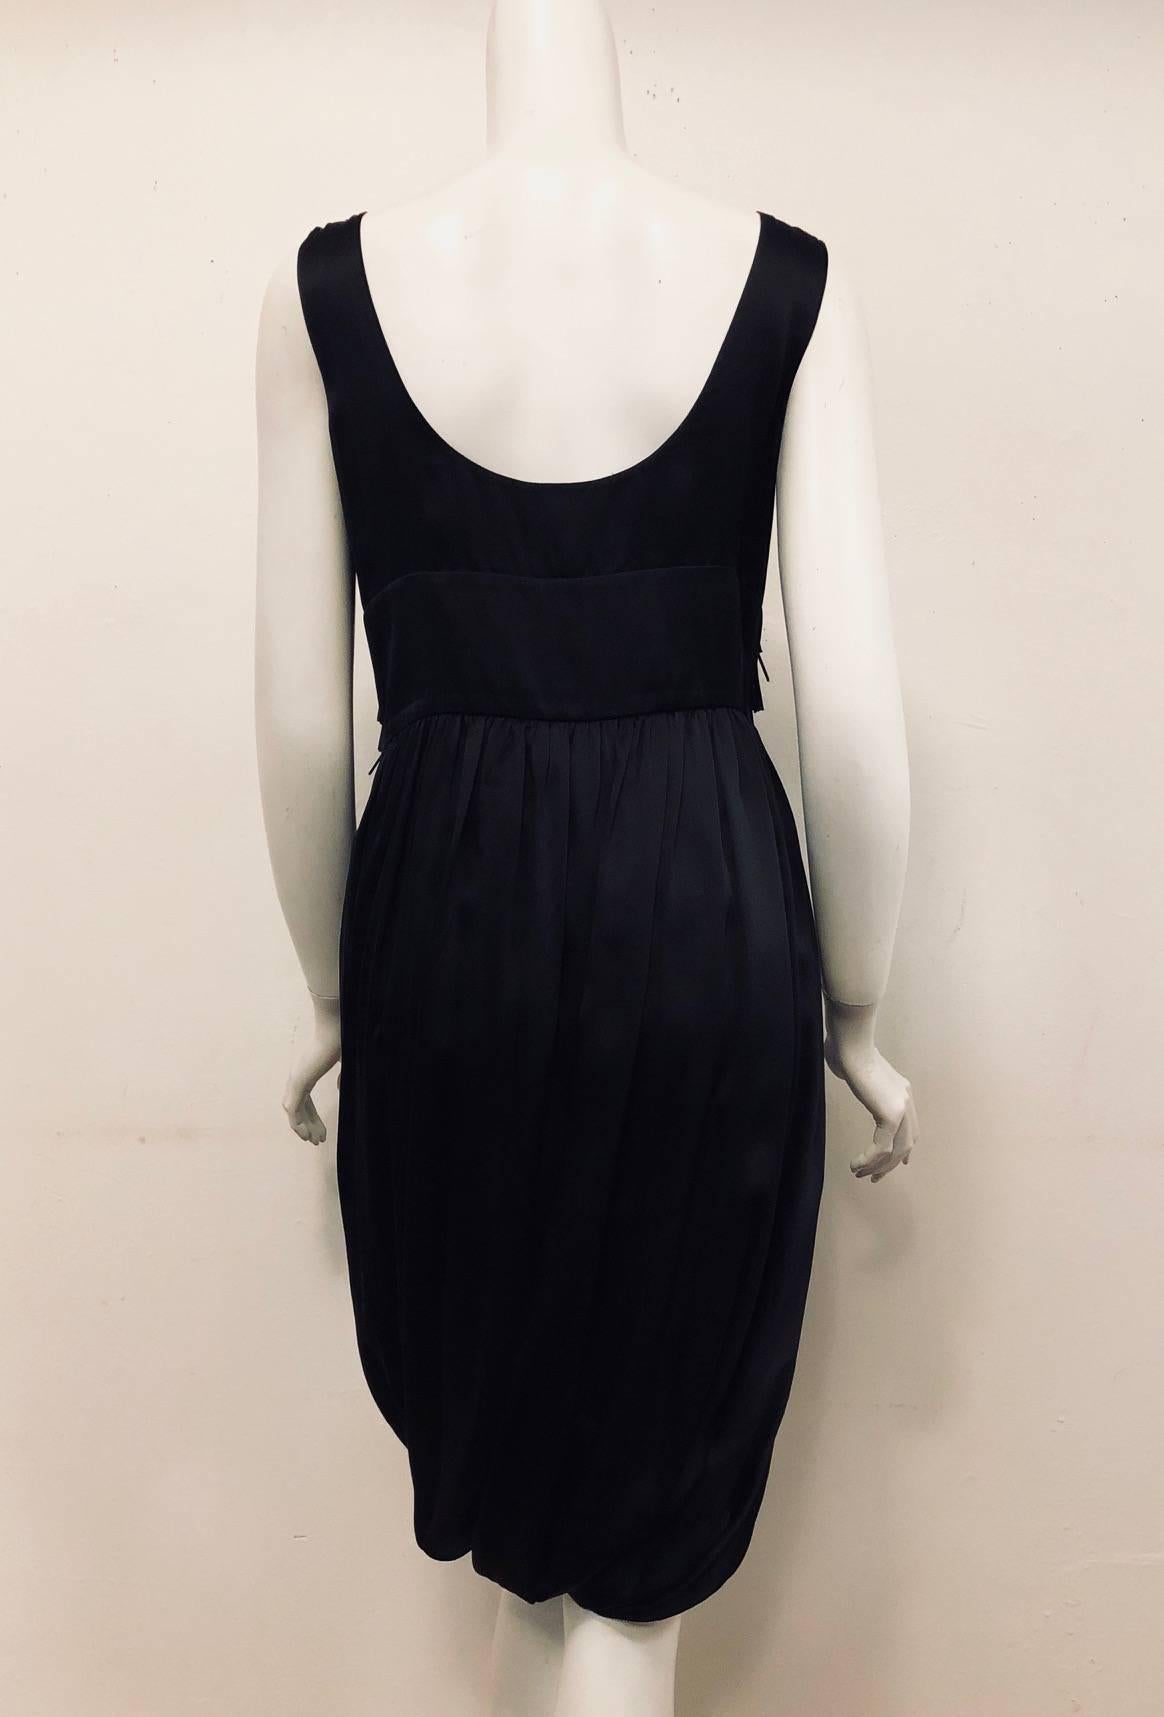 Memorable Moschino Black Silk Dress With Oscillating Black Beads at Waist  For Sale 1